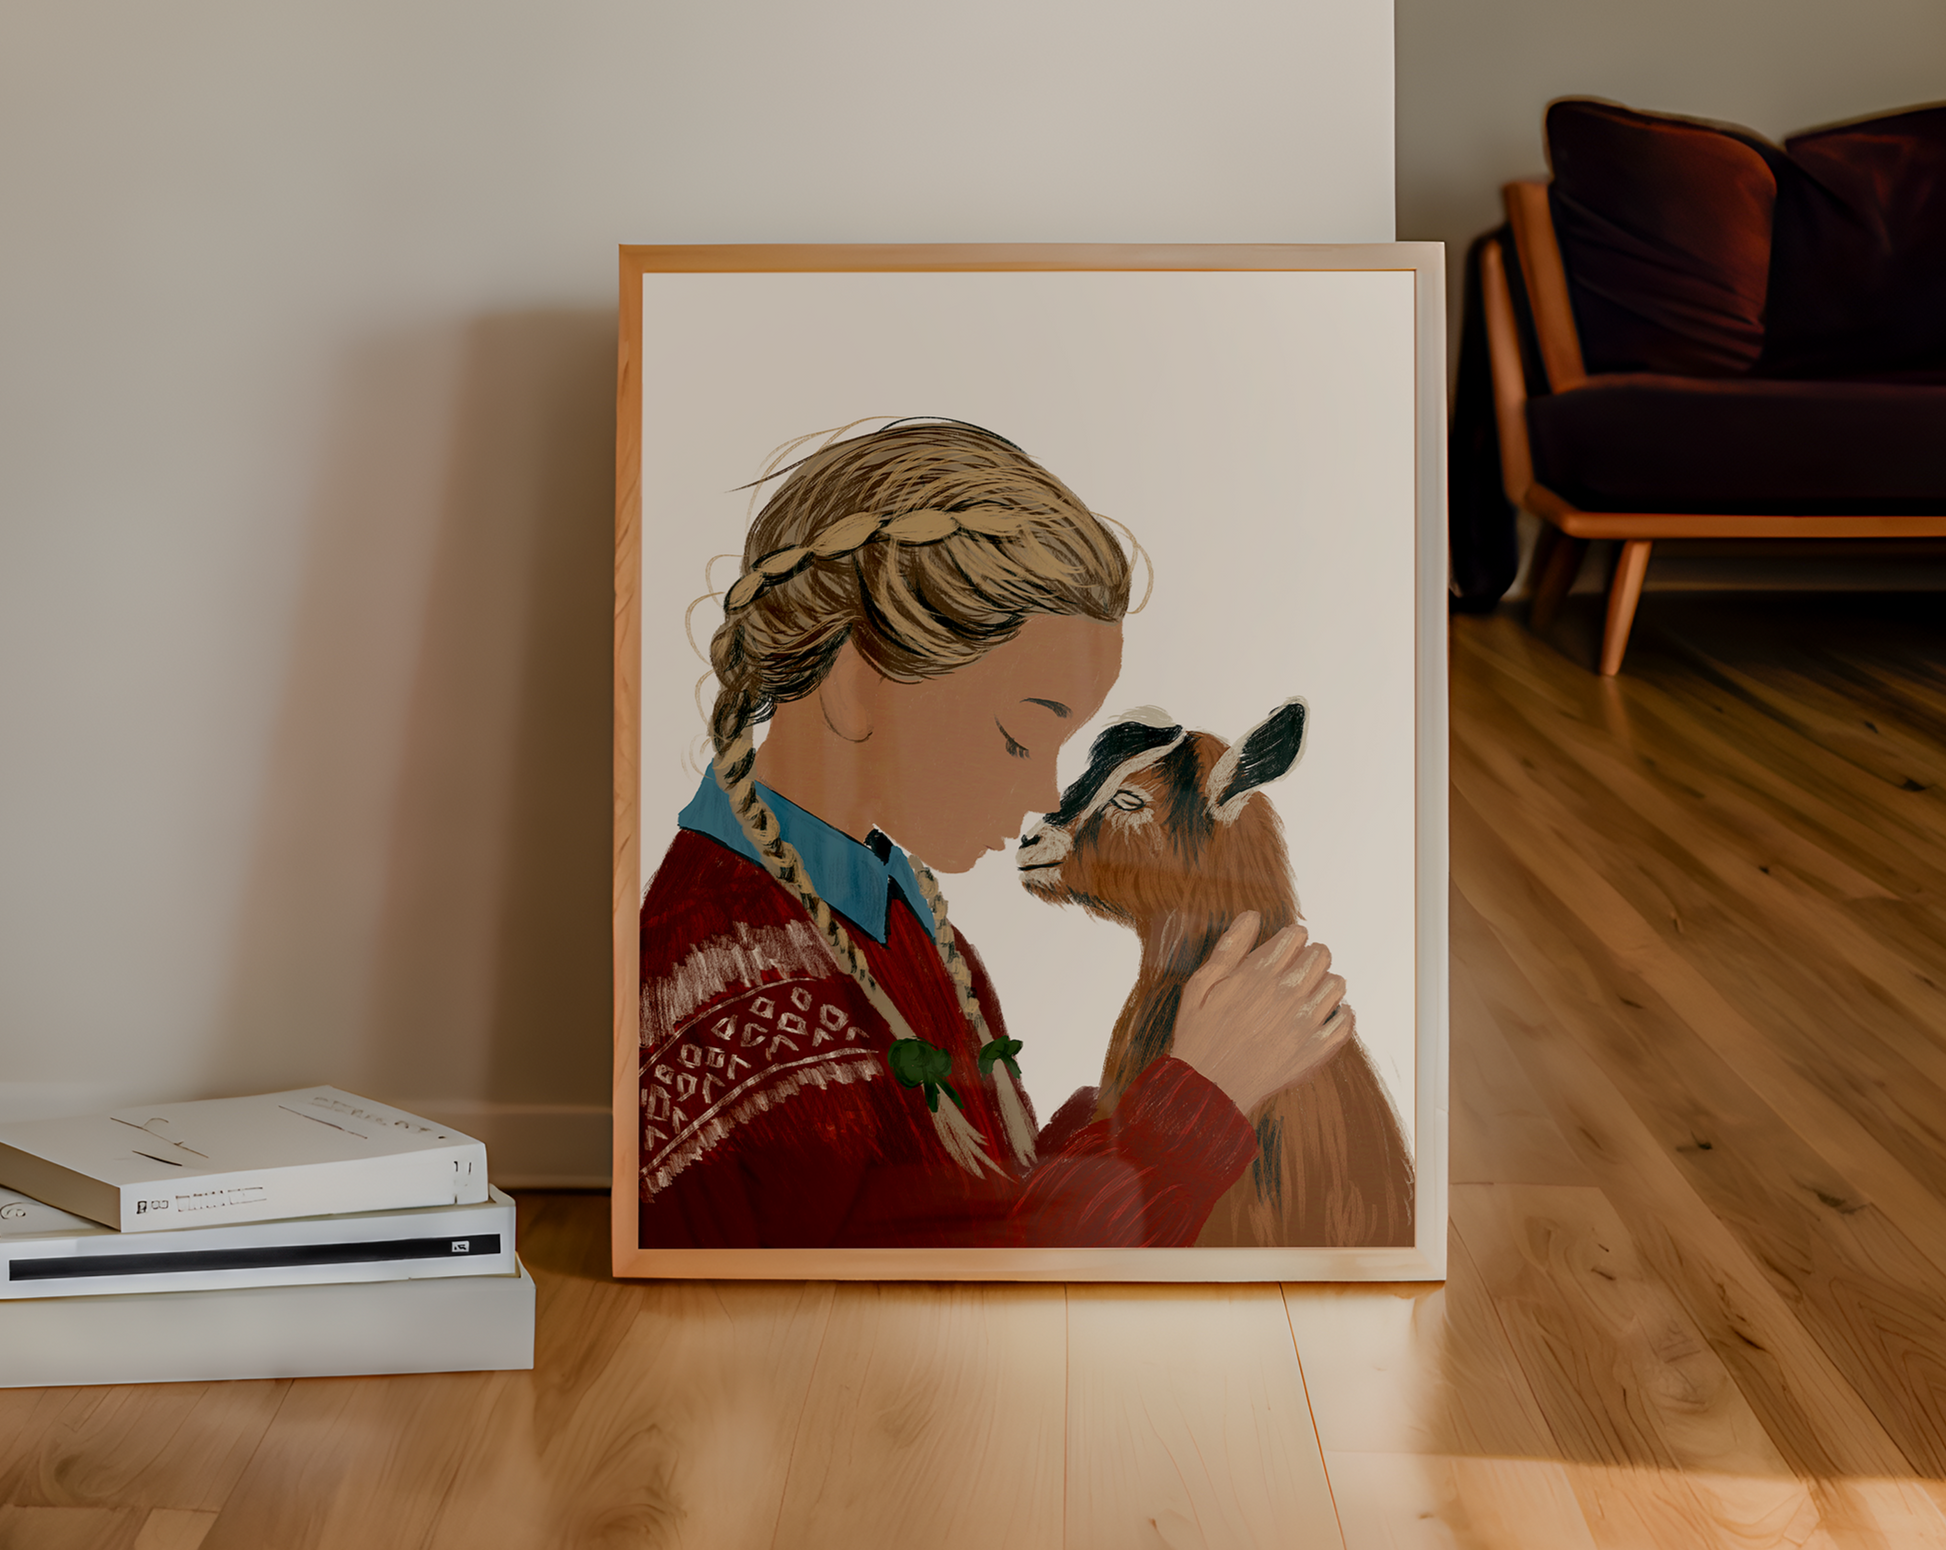 A framed digital print of a tender moment between a girl and a goat, casually leaning against a wall on a wooden floor, enhancing the room's warmth